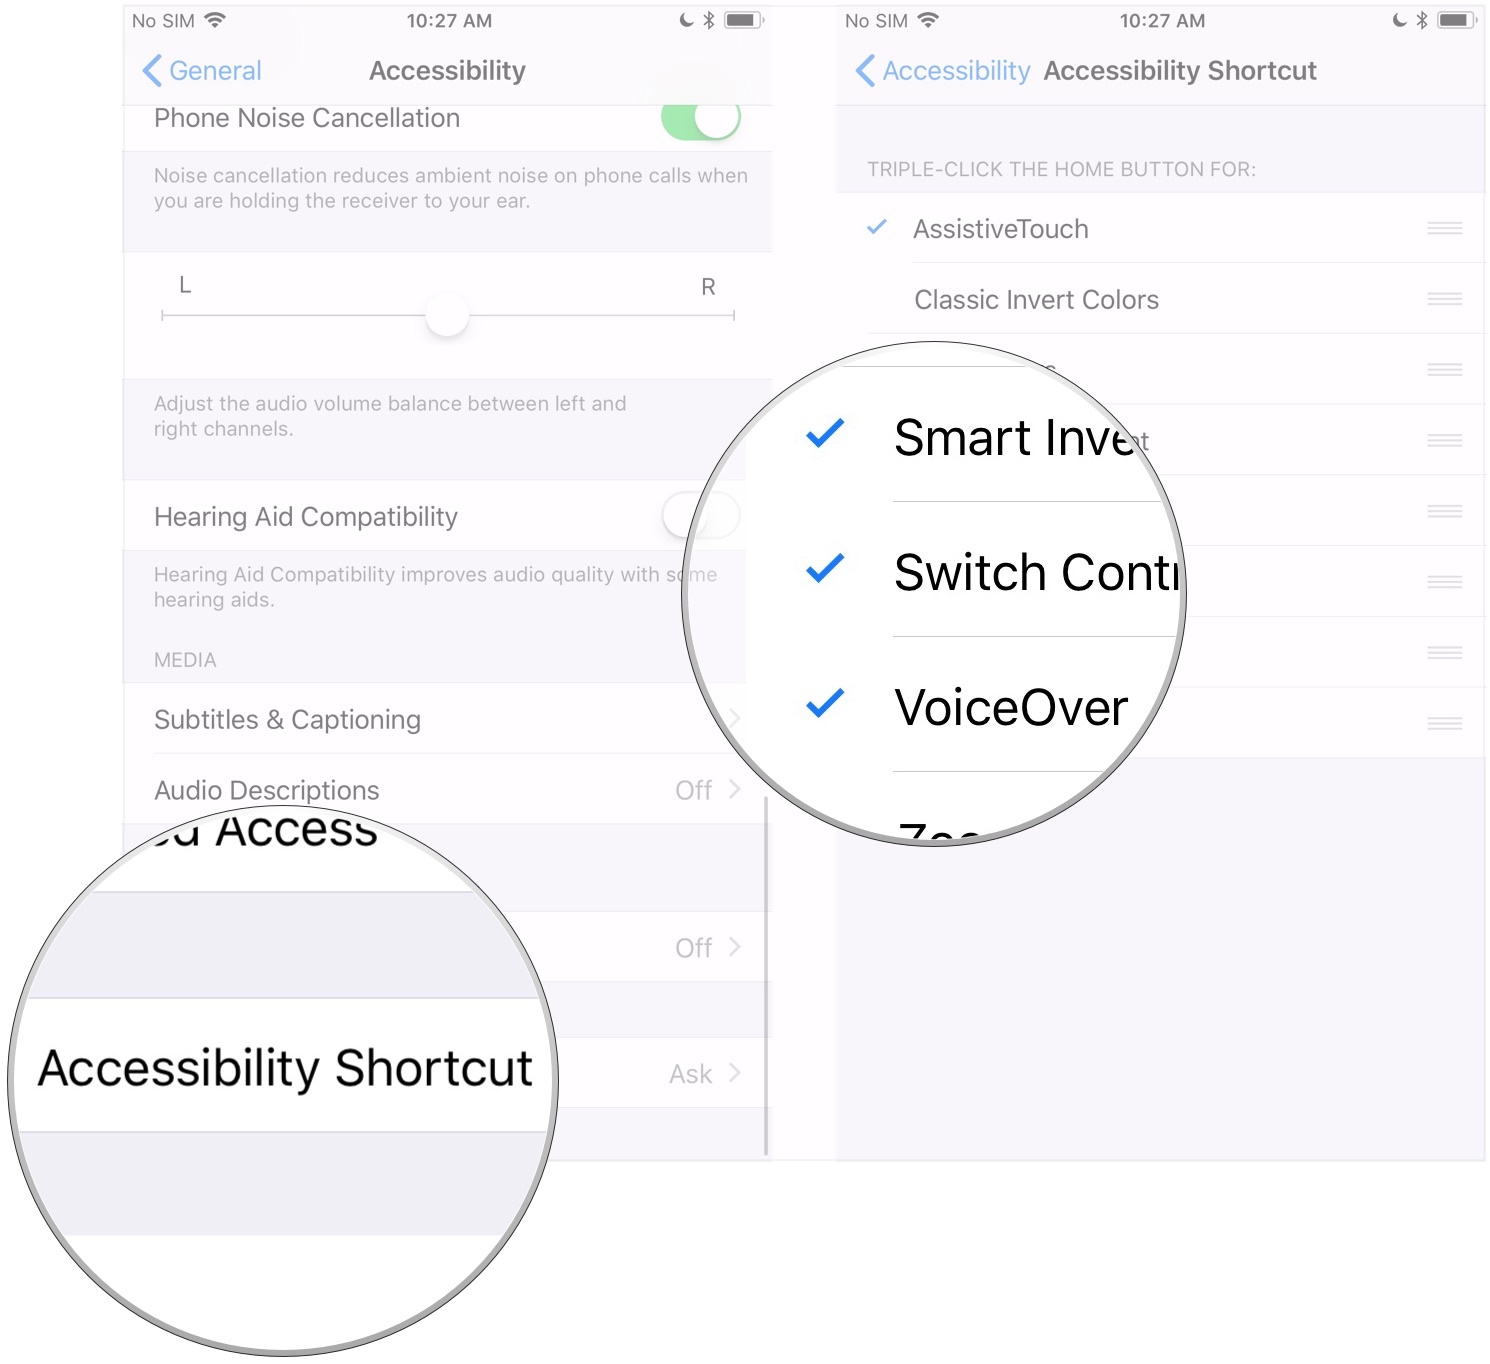 Tap Accessibility Shortcut, turn shortcuts off